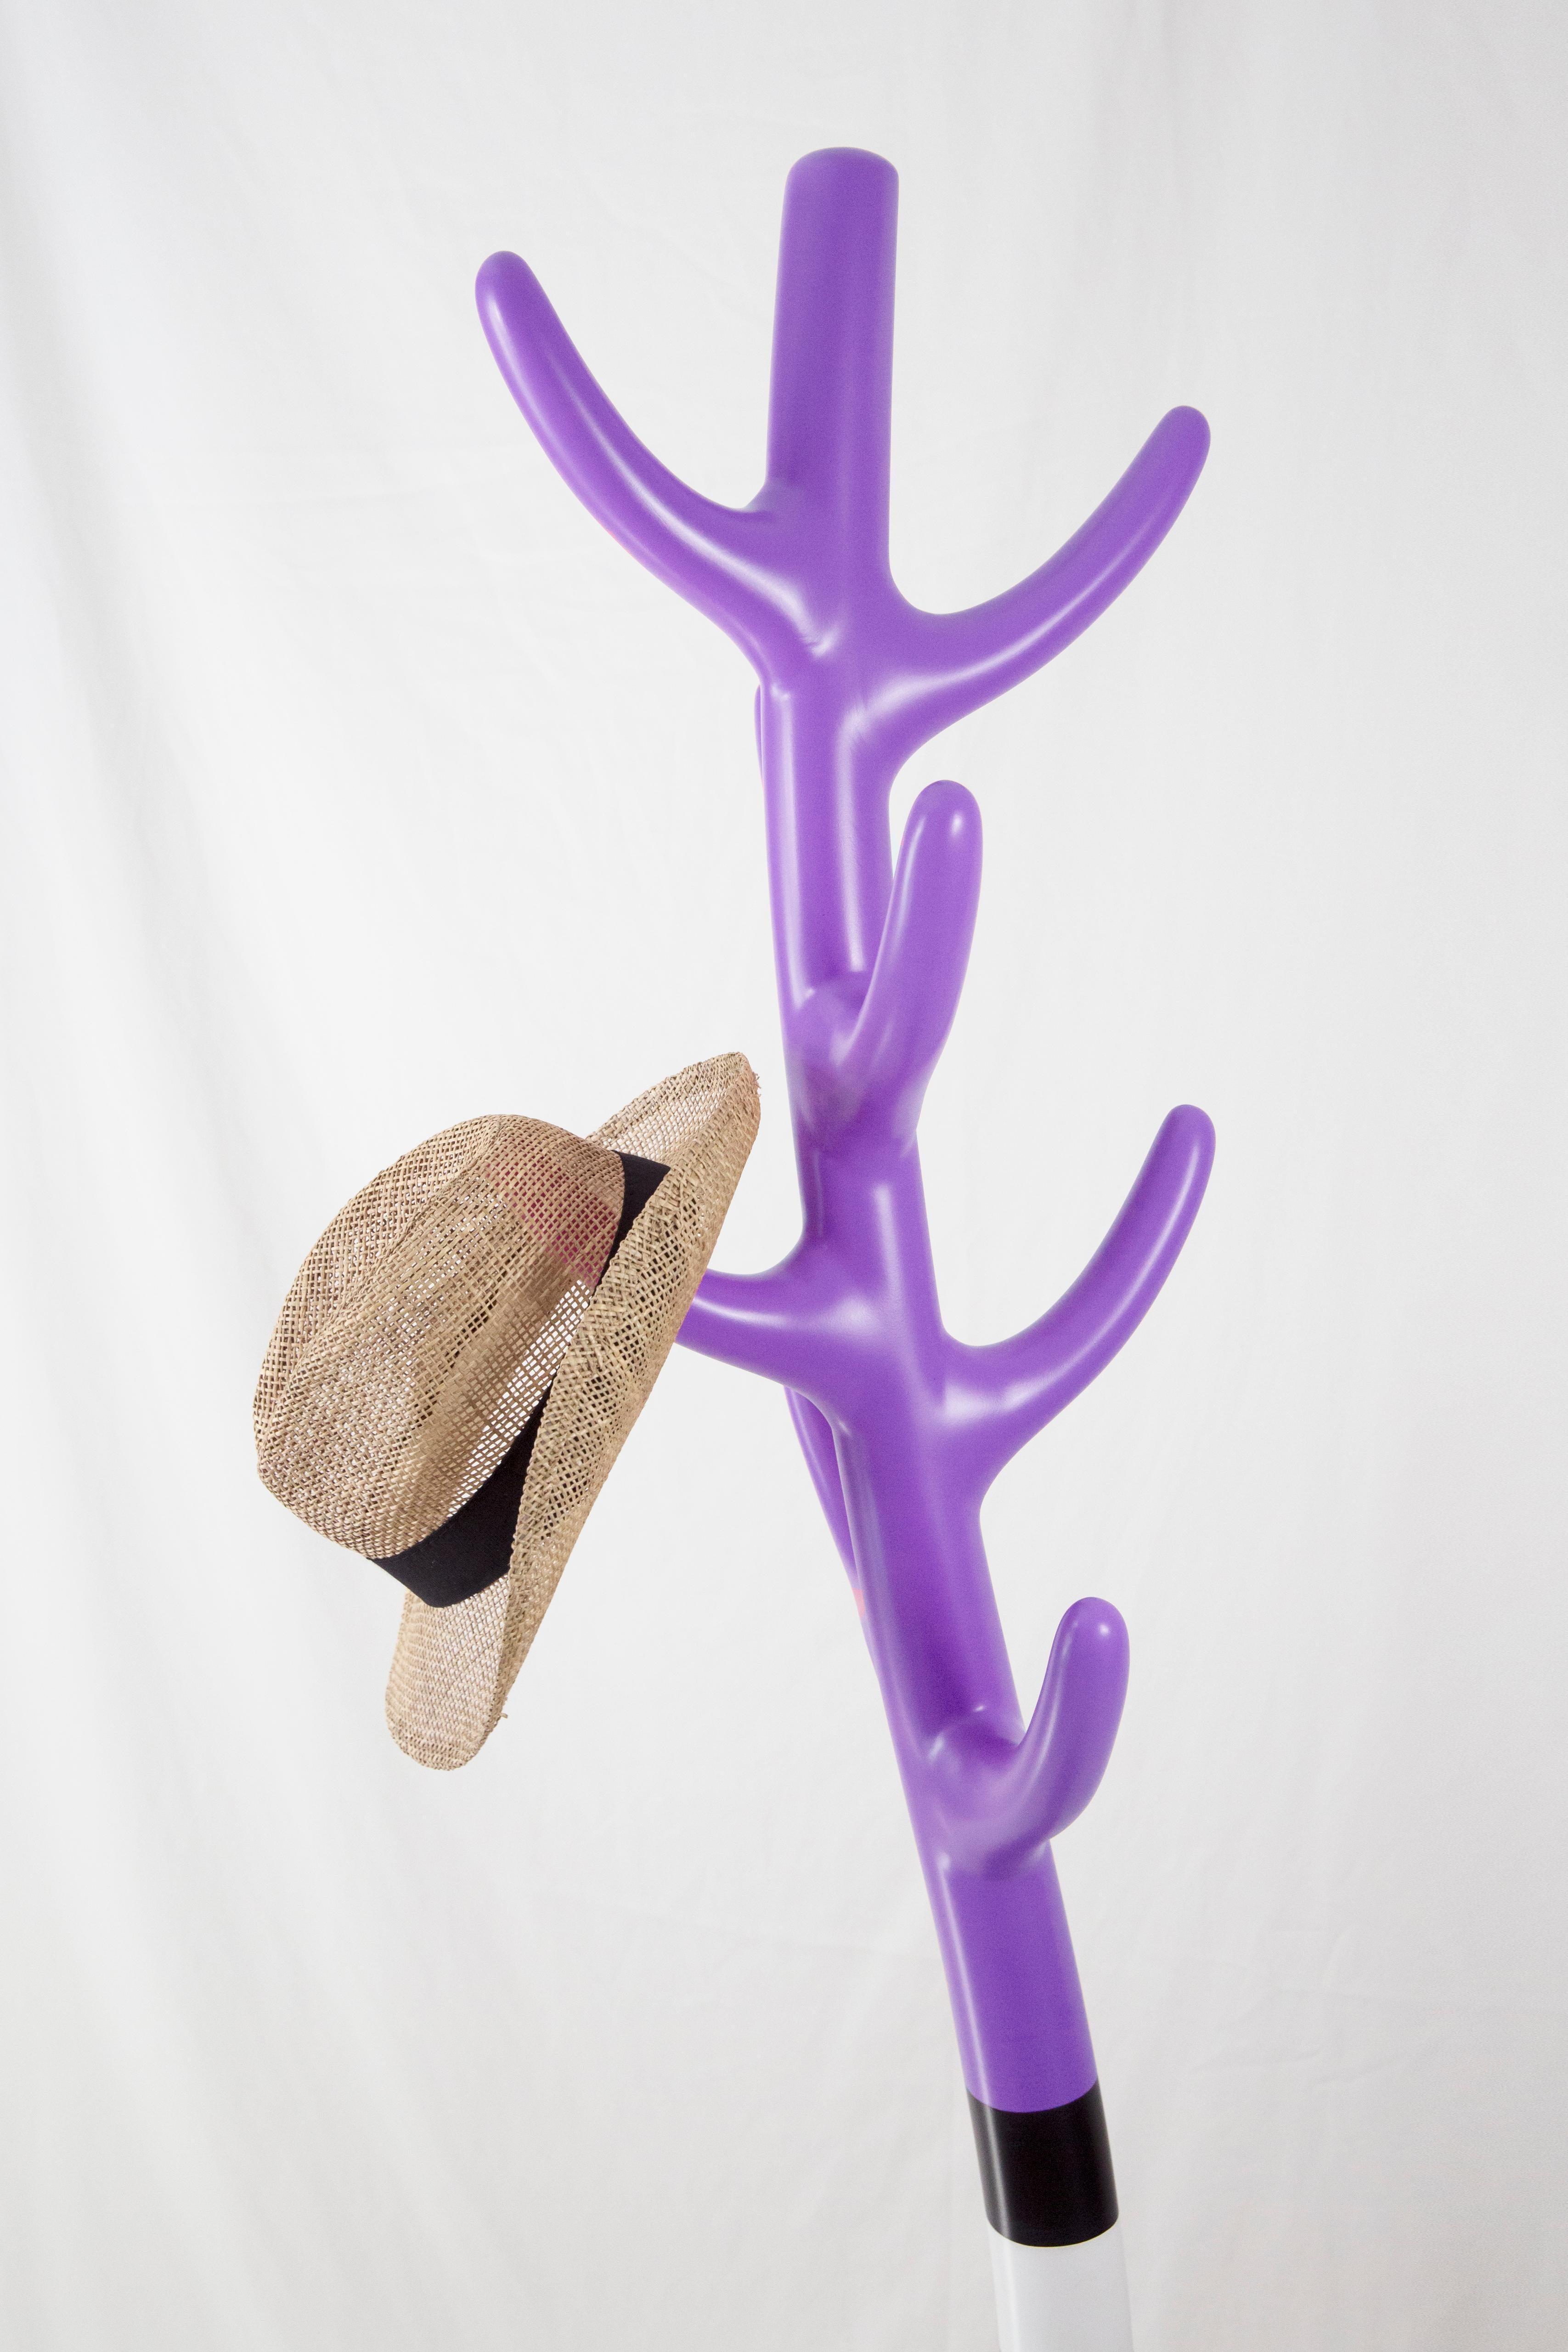 Overview:
Introduce a touch of artistic elegance to your space with the Crooked Coat Rack, a functional piece designed with a sculptural, amorphous form. In a delightful lilac shade, this coat rack not only serves its purpose but also acts as a